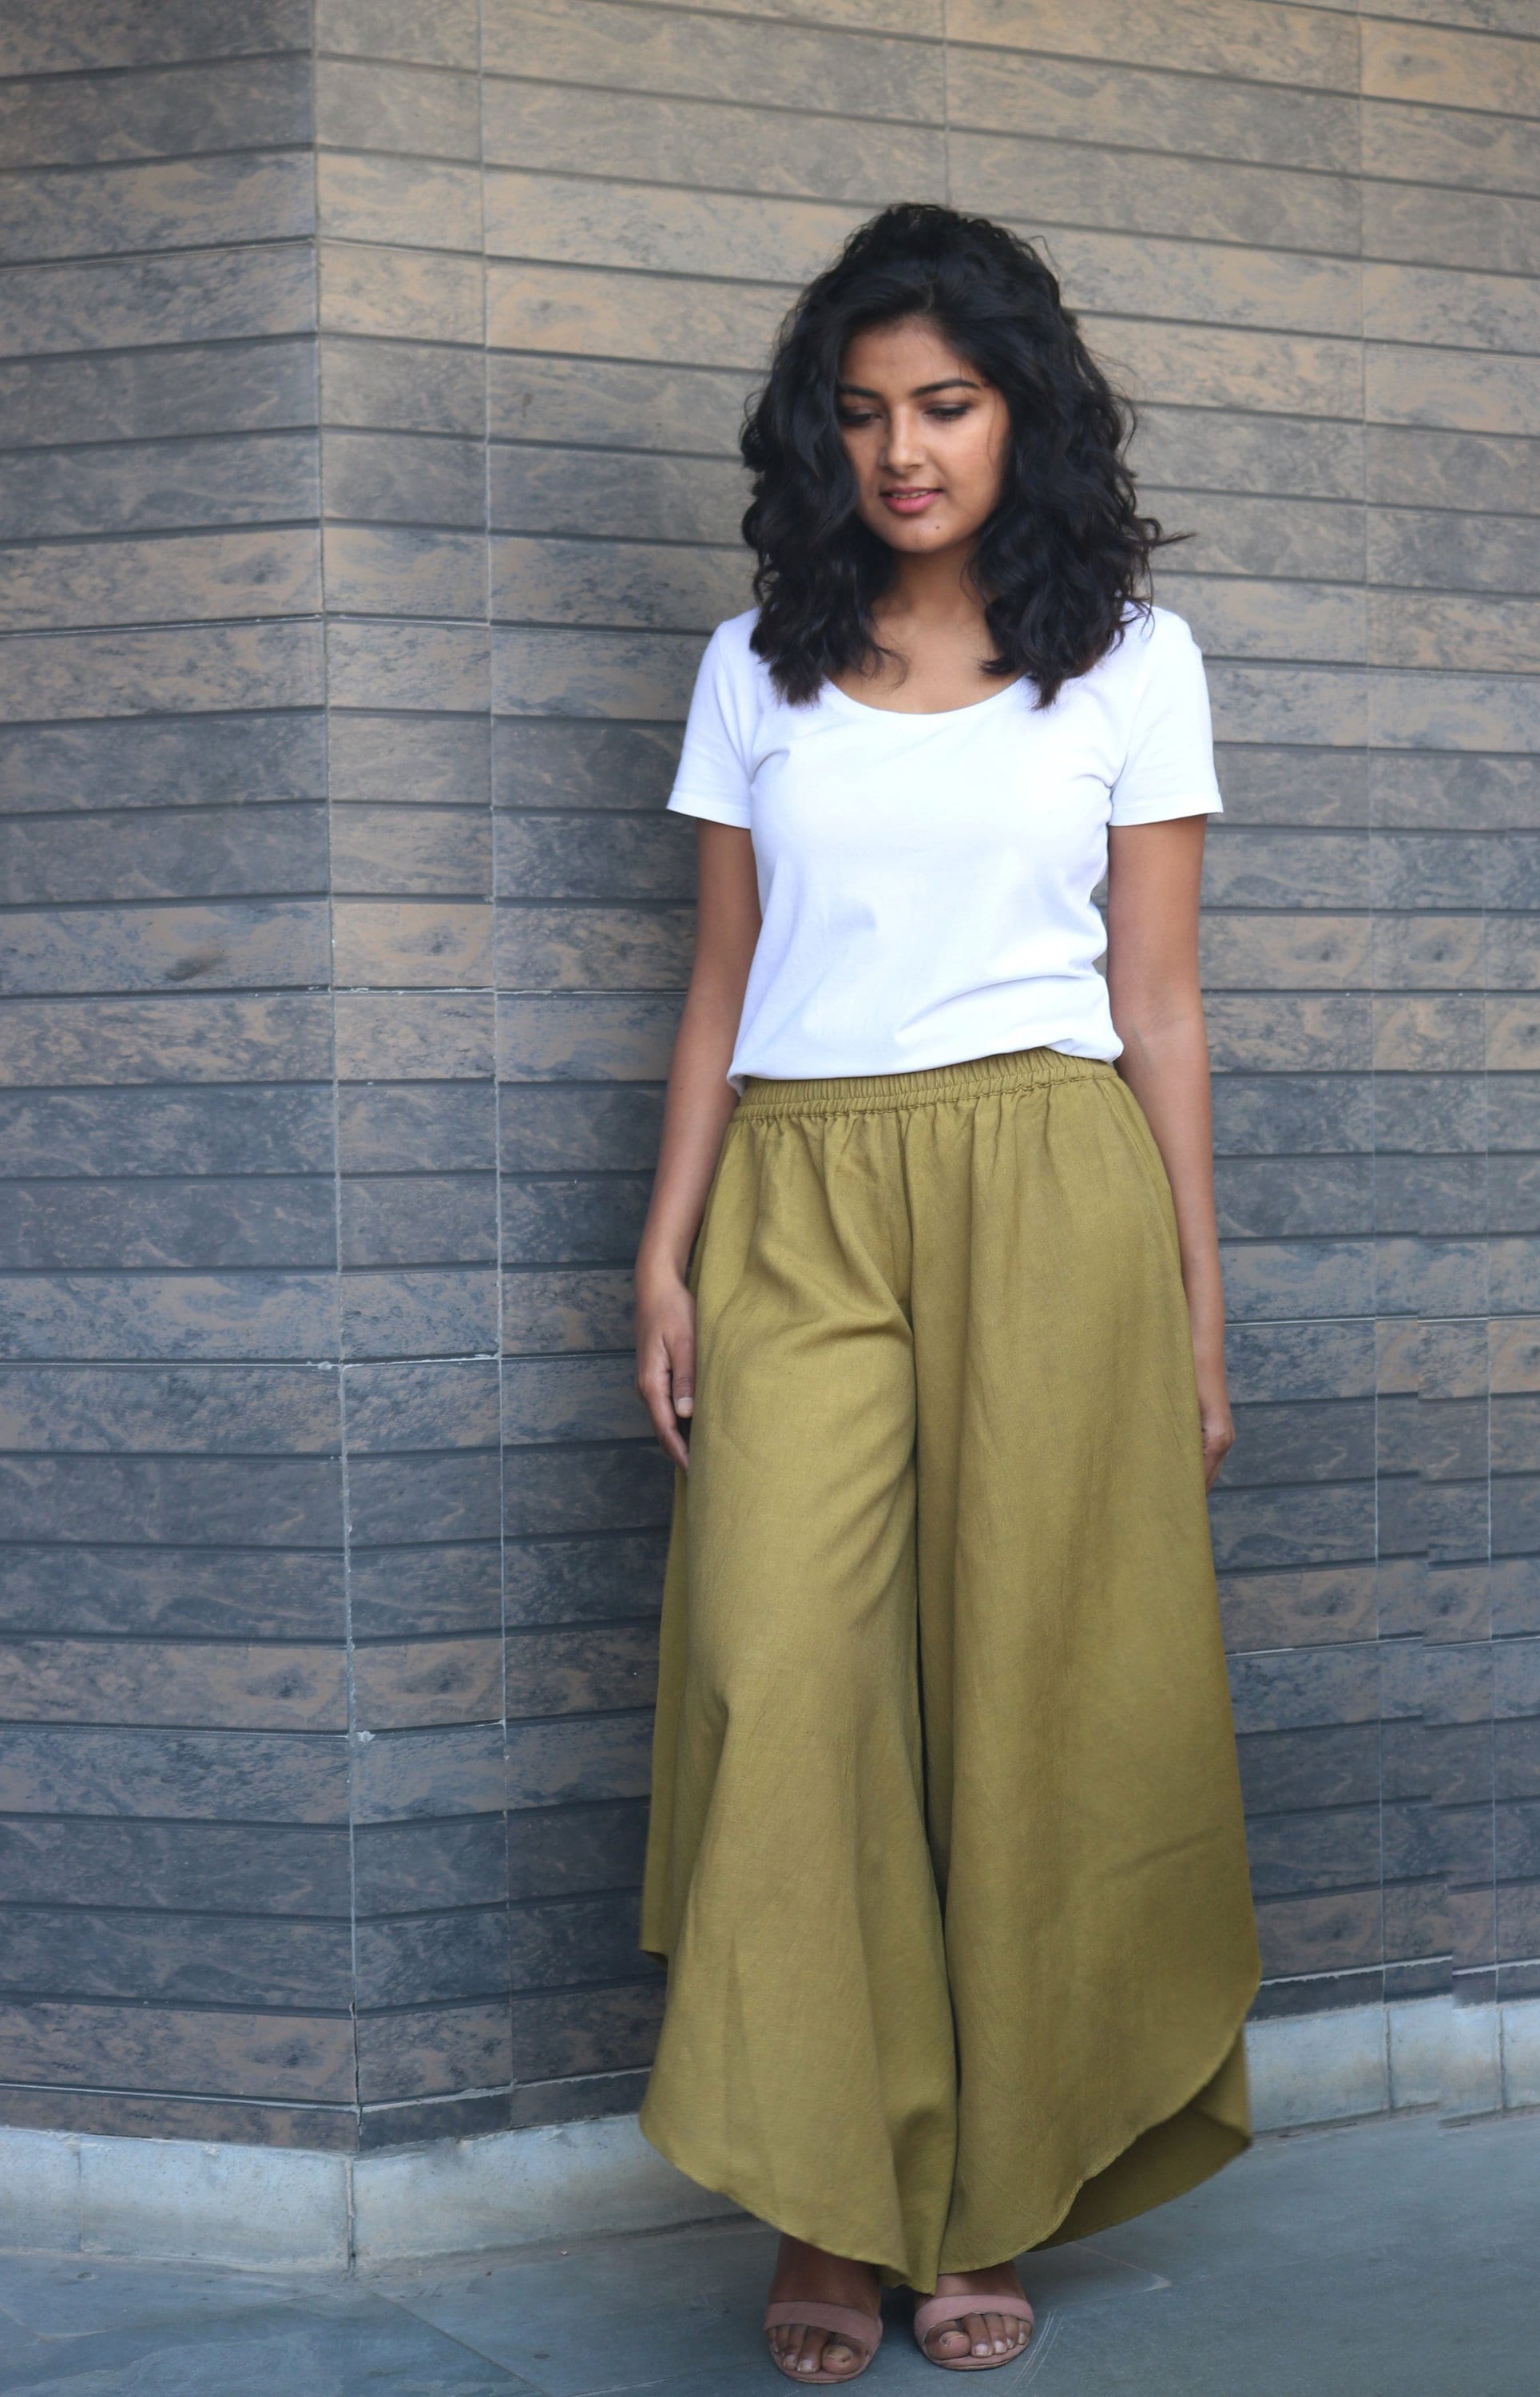 Olive Flare Linen Pants for Women Gaucho Made to Order - Etsy